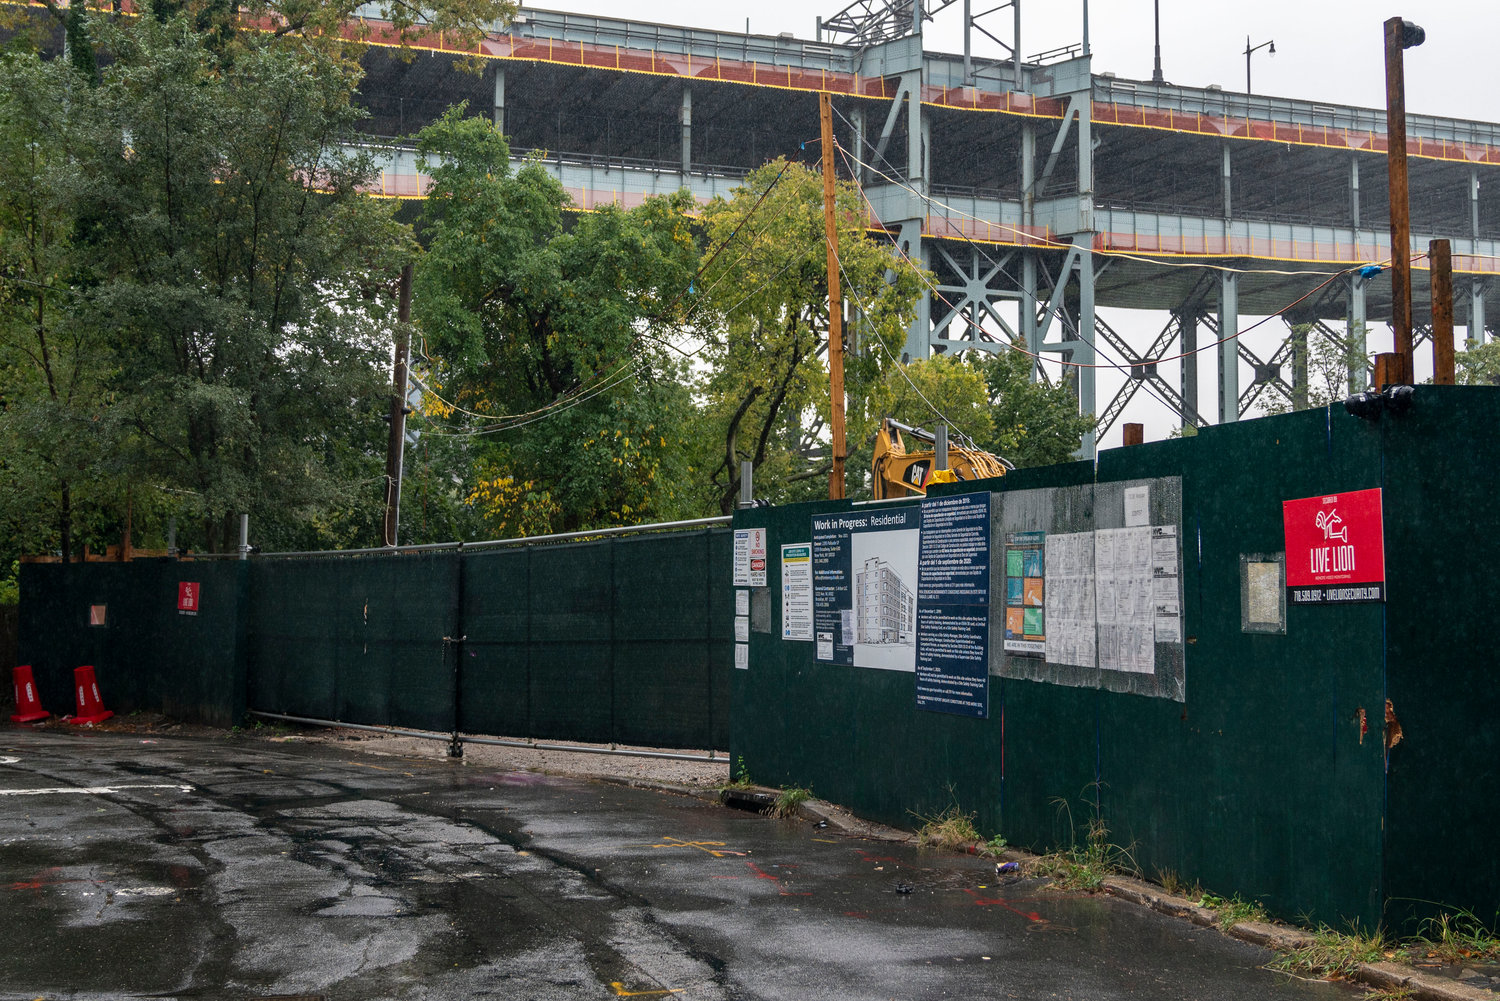 Construction is beginning on the Palisade Avenue site where Villa Rosa Bonheur once stood. Plans are to build a 55-unit apartment complex on the land overlooking the Spuyten Duyvil Creek.